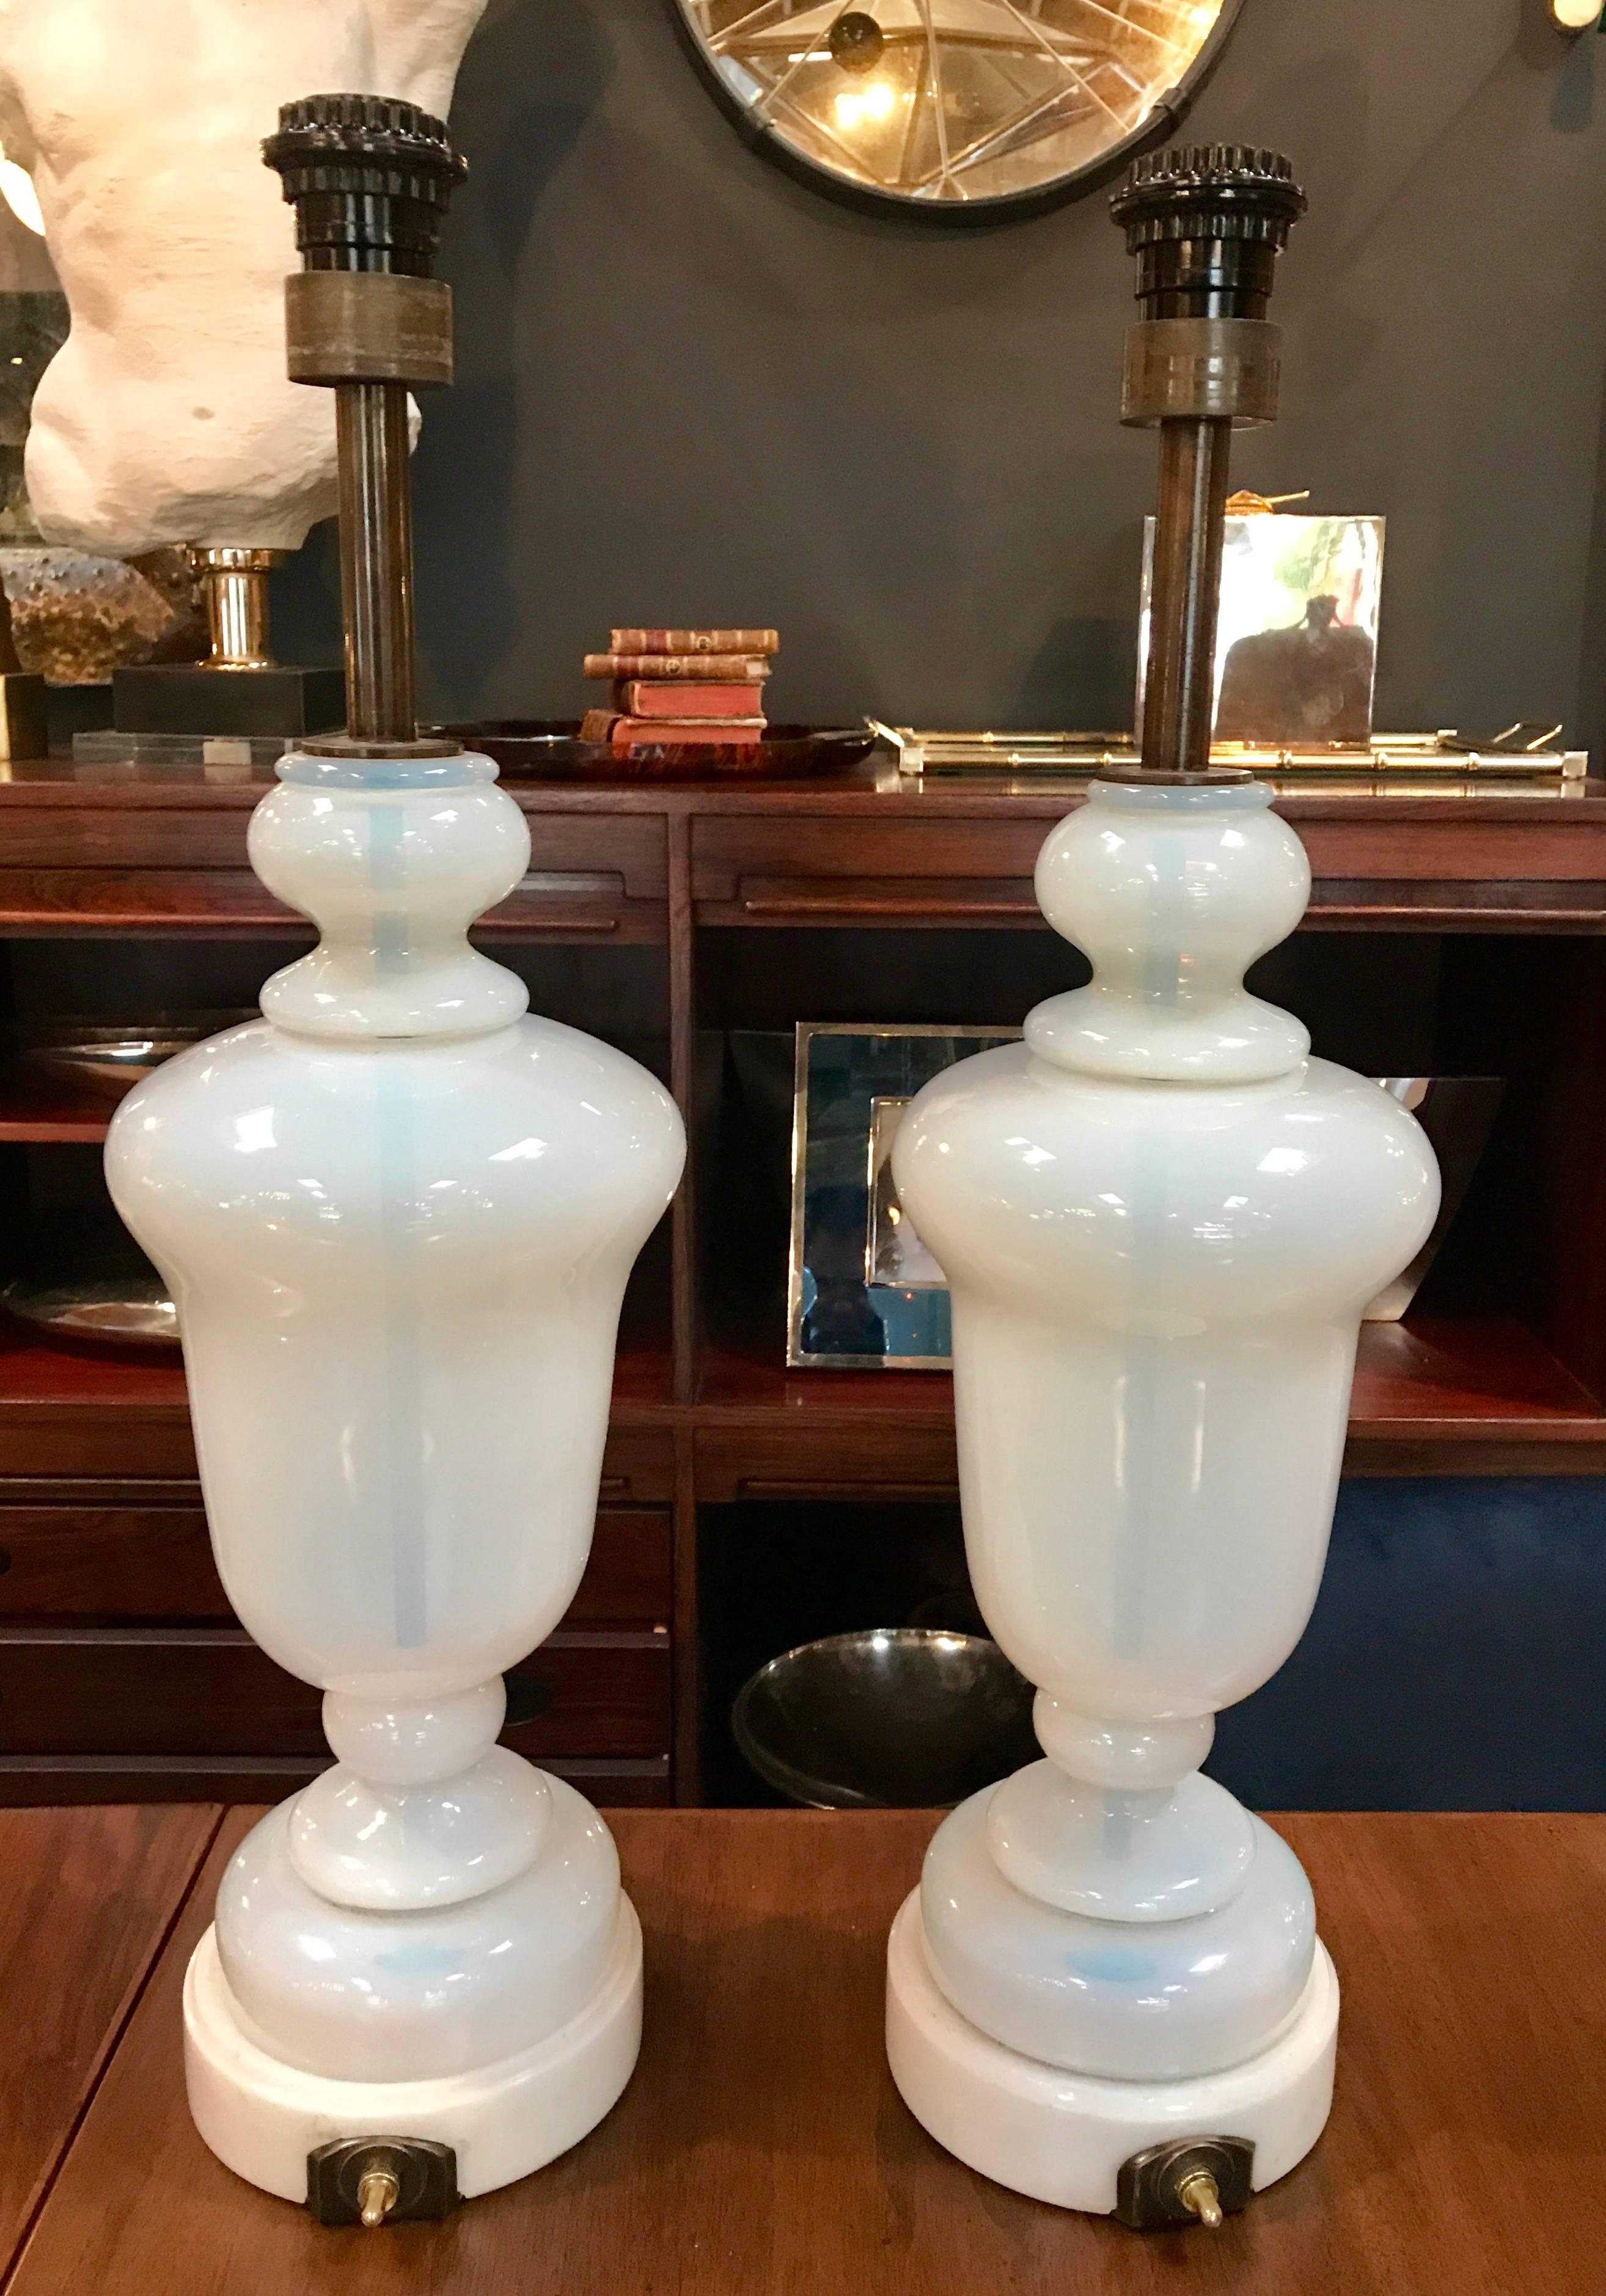 Pair of Seguso Murano glass lamps with Carrara marble base.
Rewire.